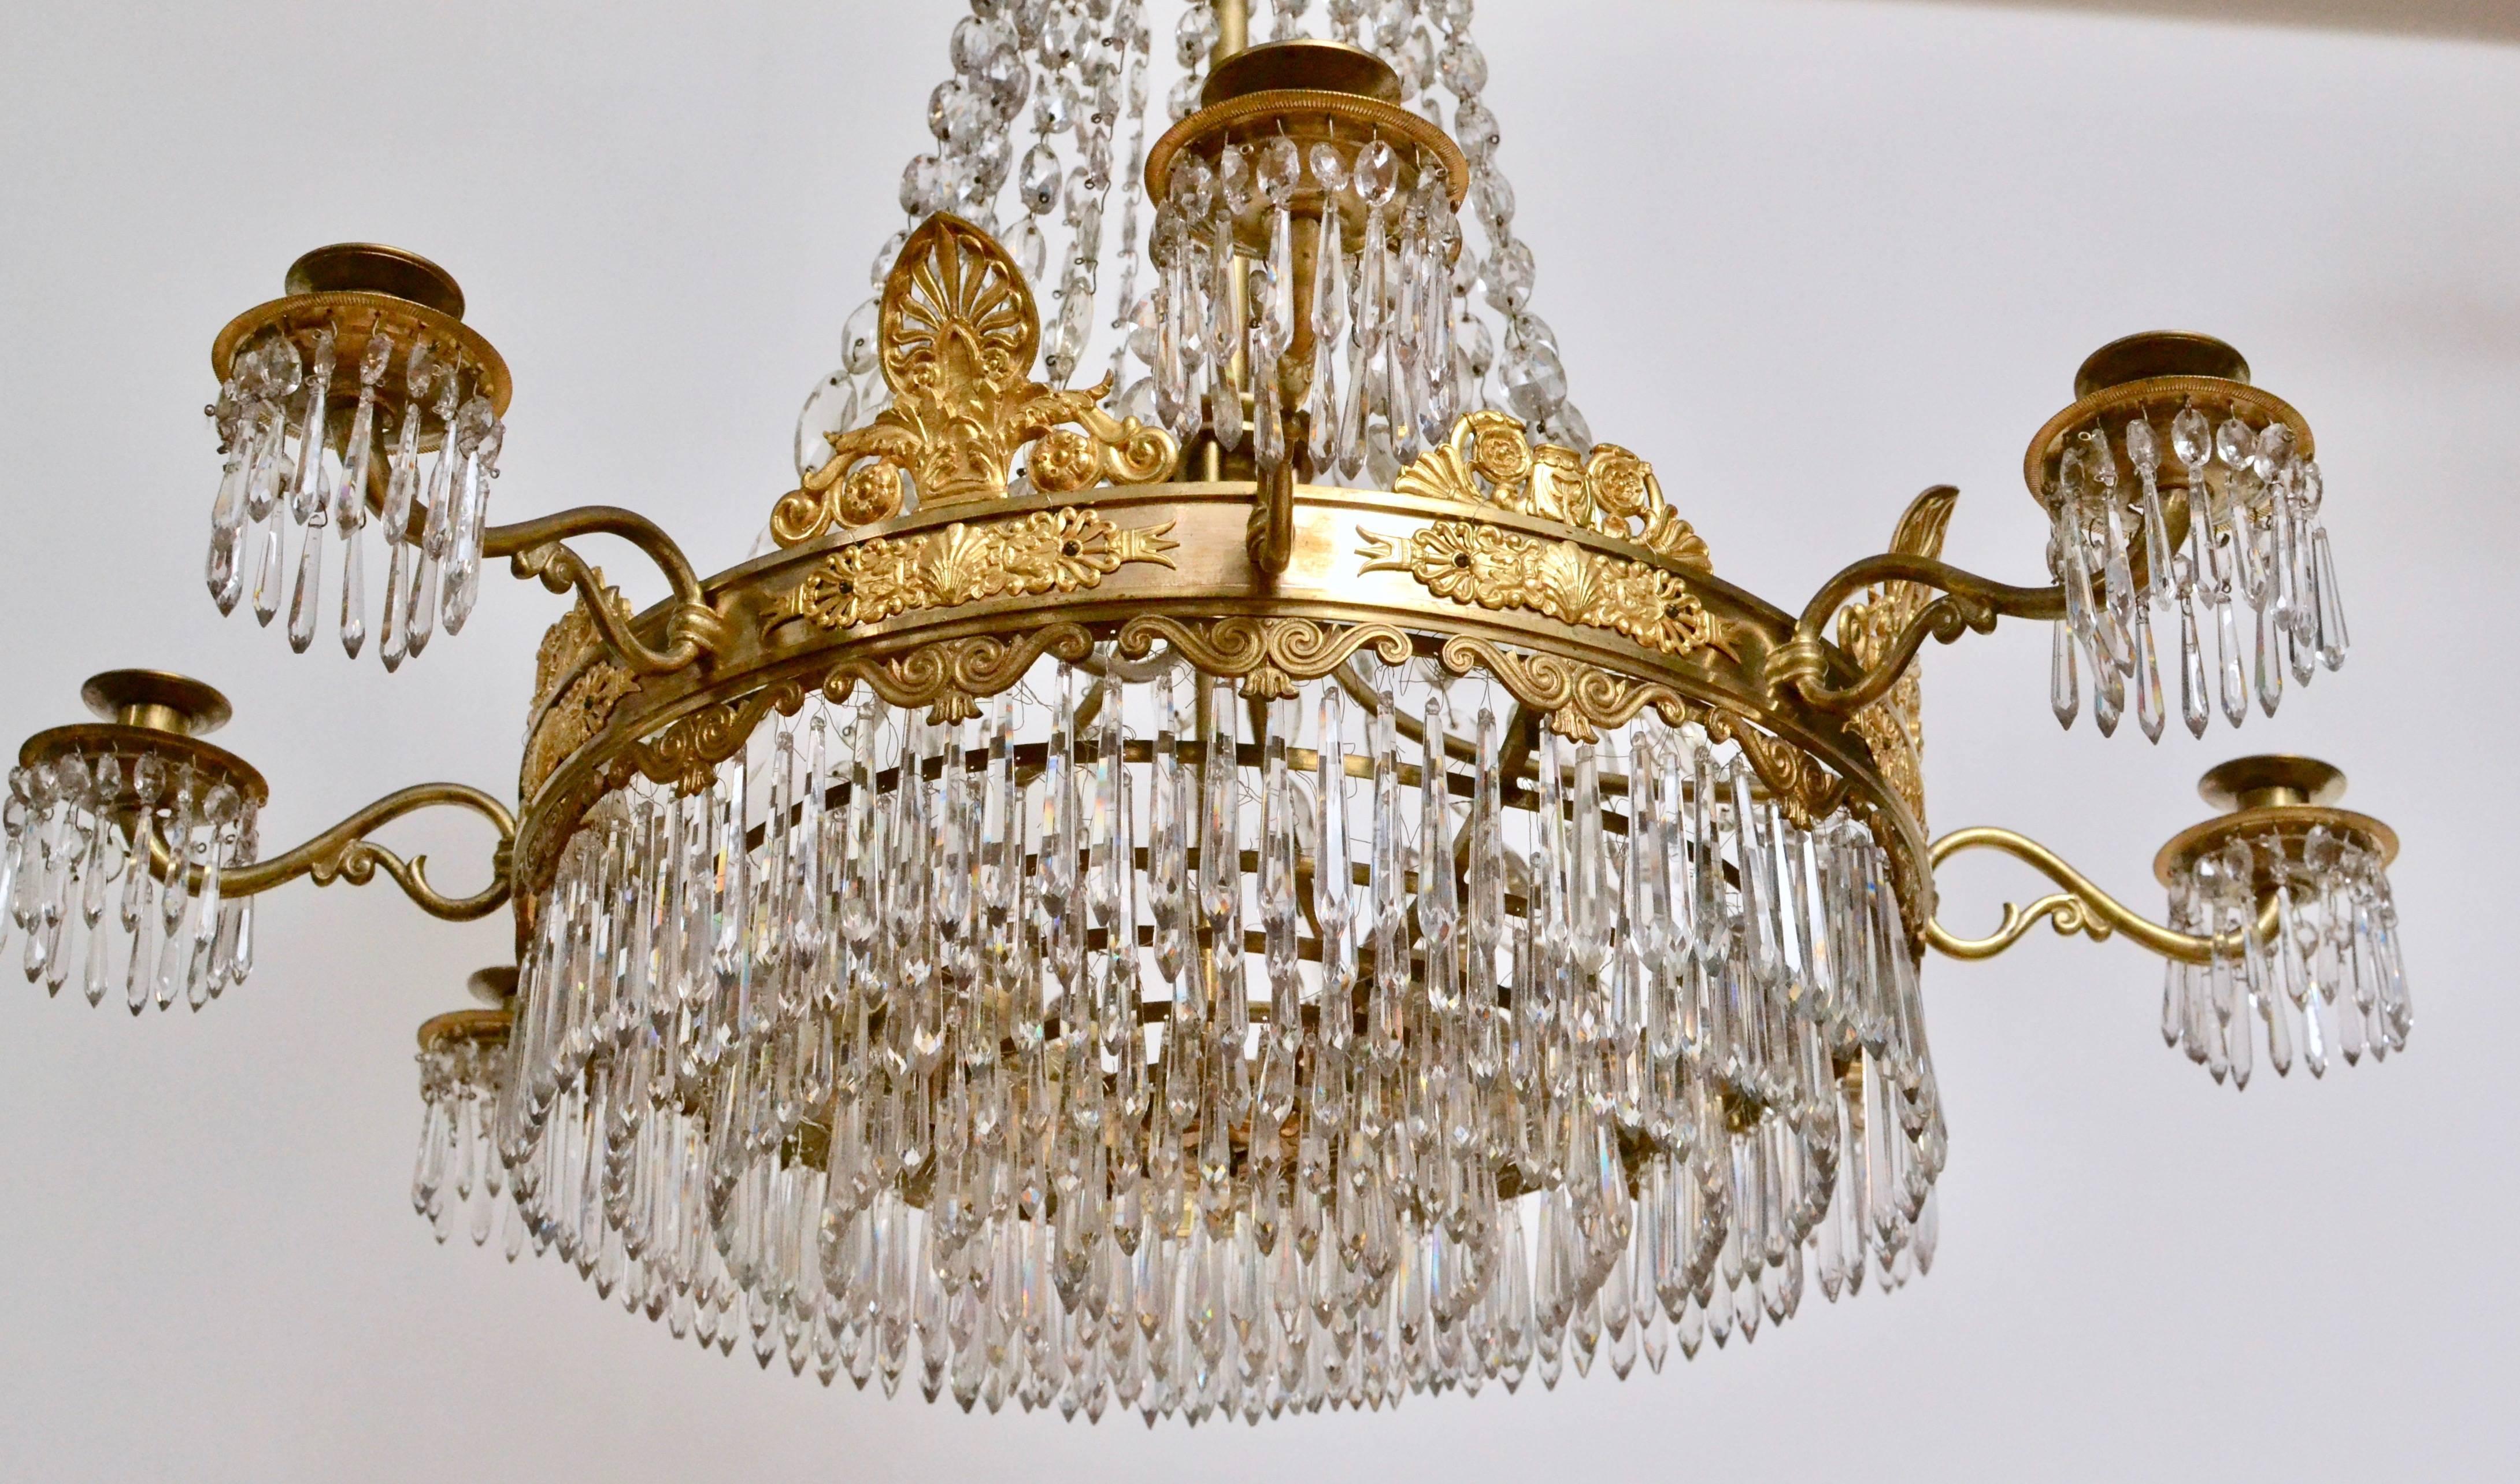 Early 19th Century French Empire Gilt Bronze and Crystal Chandelier, Signed, circa 1825